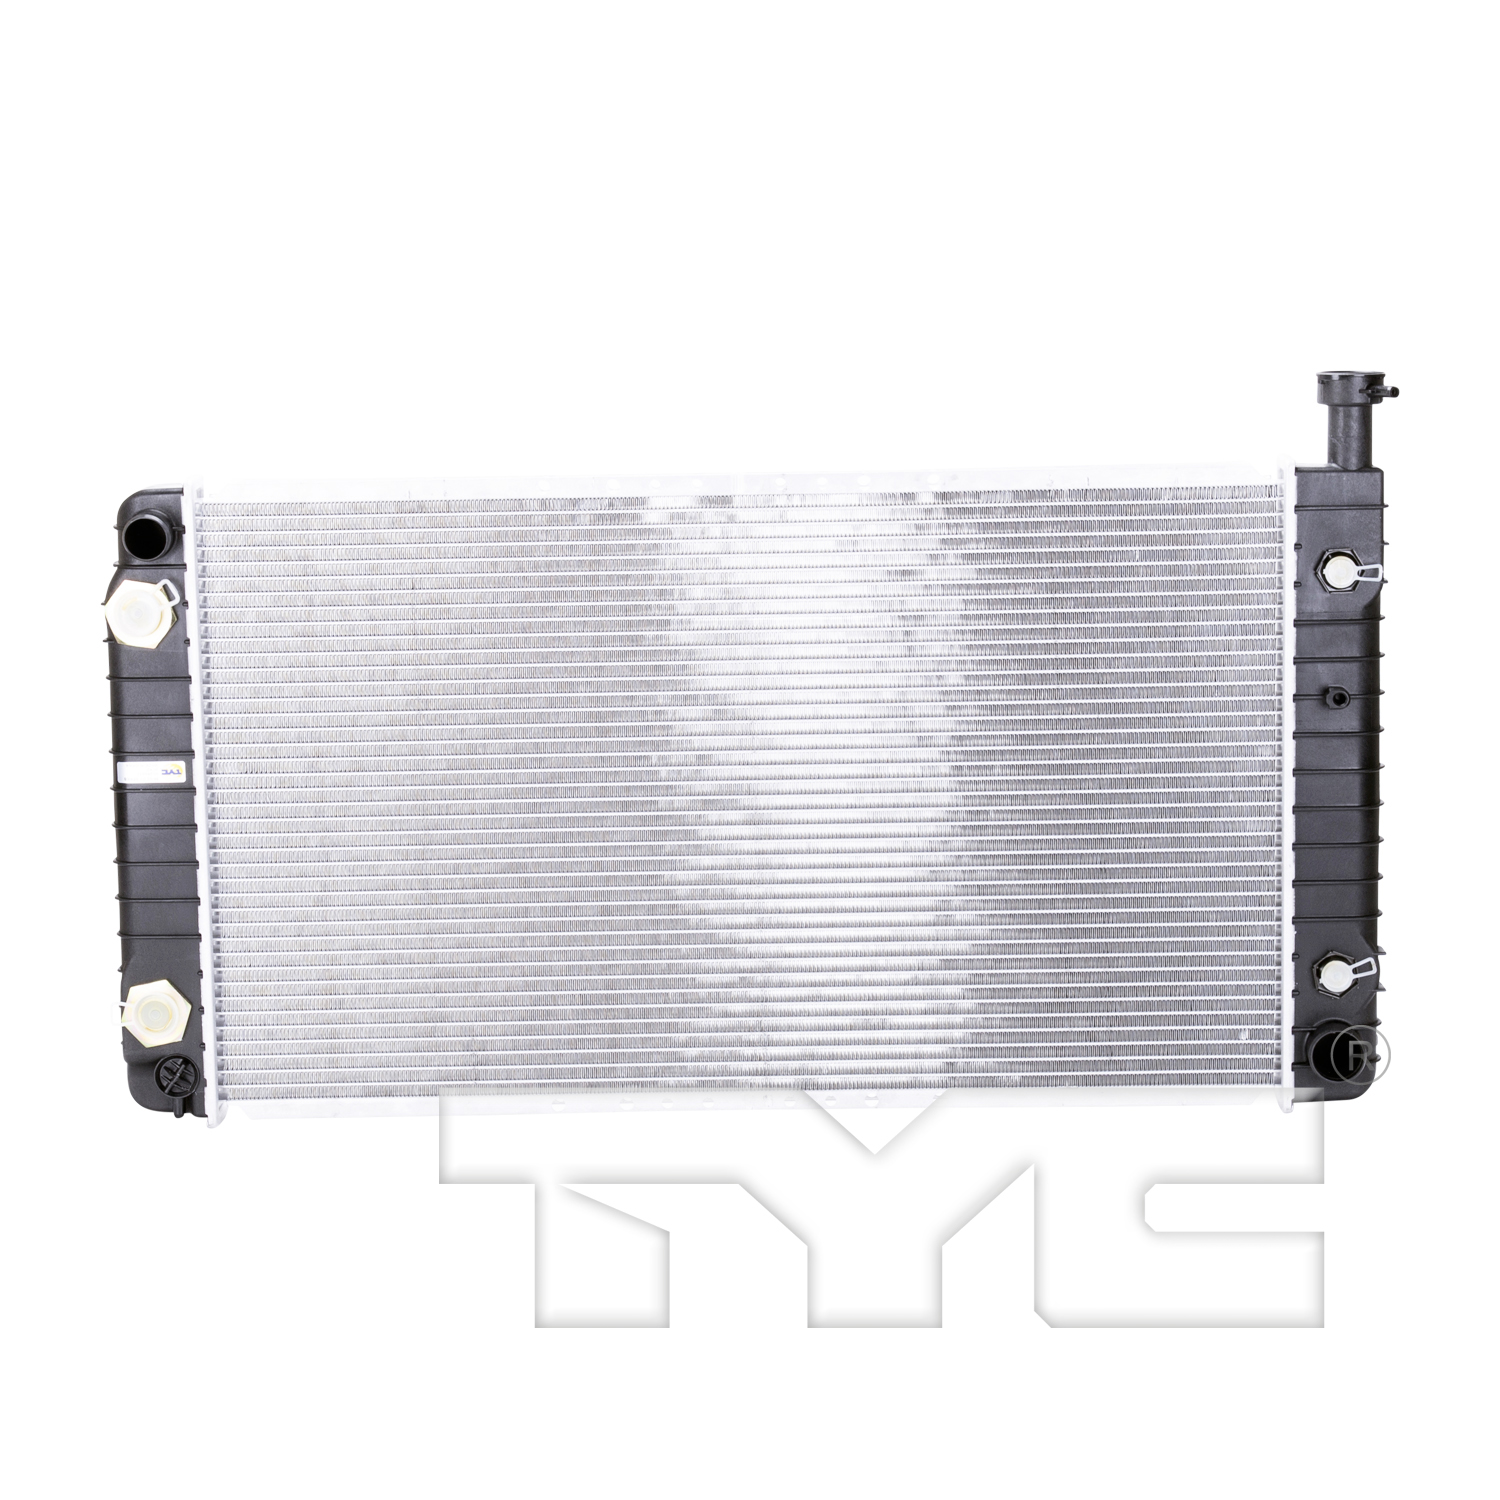 Aftermarket RADIATORS for CHEVROLET - EXPRESS 2500, EXPRESS 2500,96-96,Radiator assembly